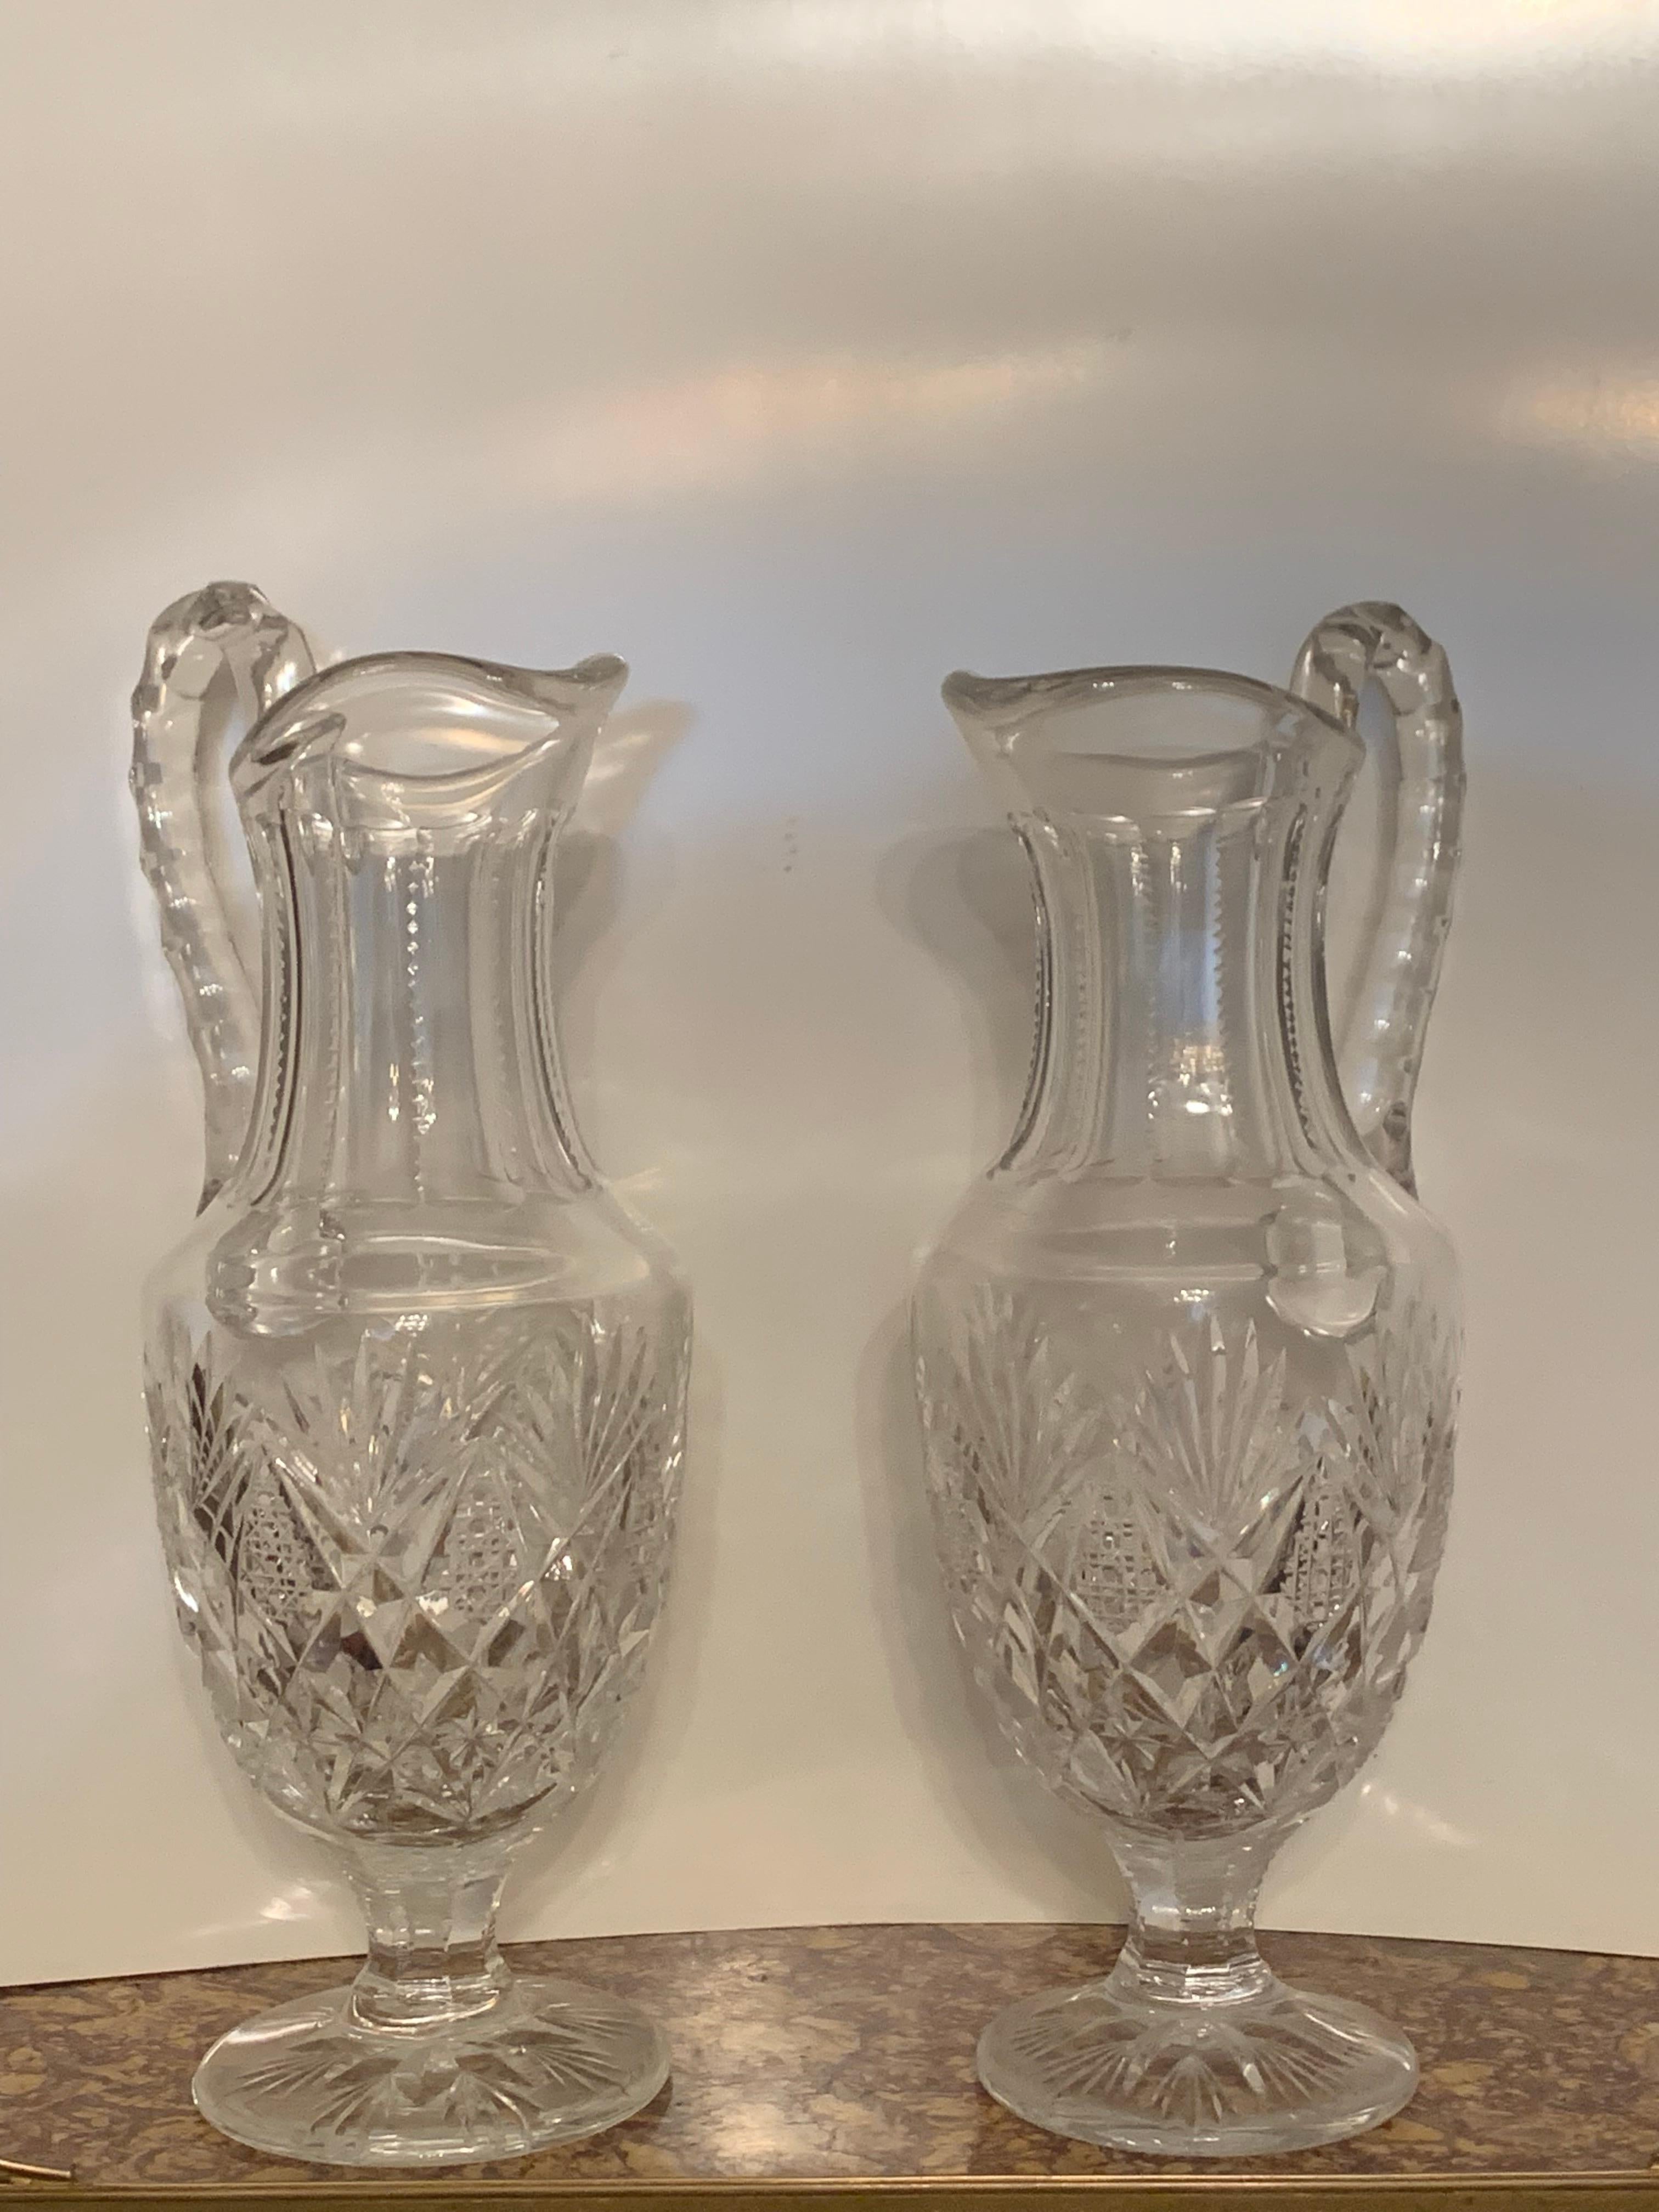 Beautiful and elegant pair of crystal decanters probably saint louis crystal.